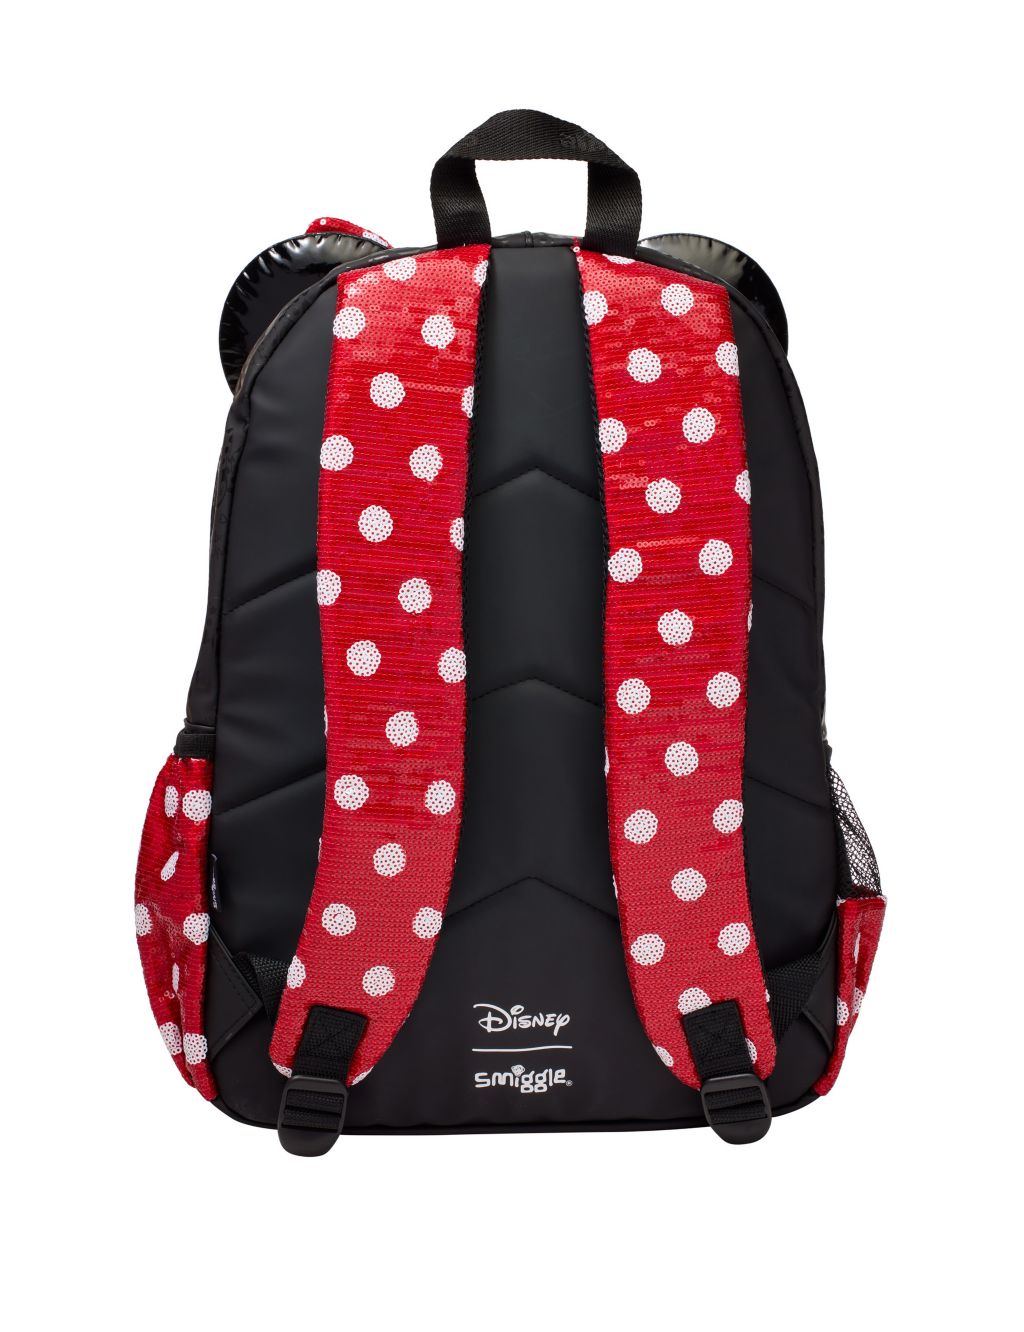 Kids' Minnie Mouse™ School Backpack image 2